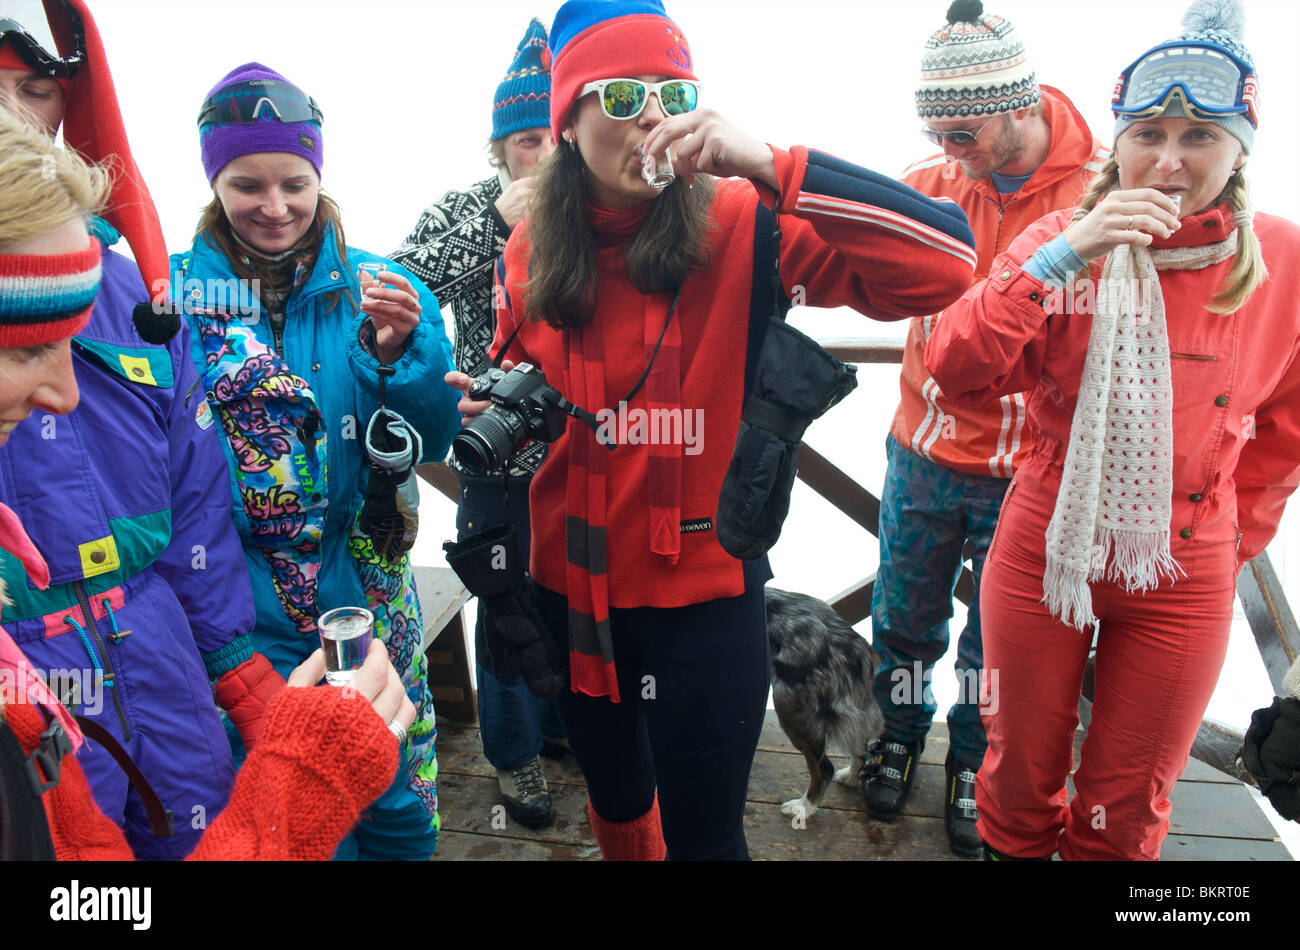 Slovakia, Jasna, group of instructors dressed up to the eighties celebrating the end of the season Stock Photo